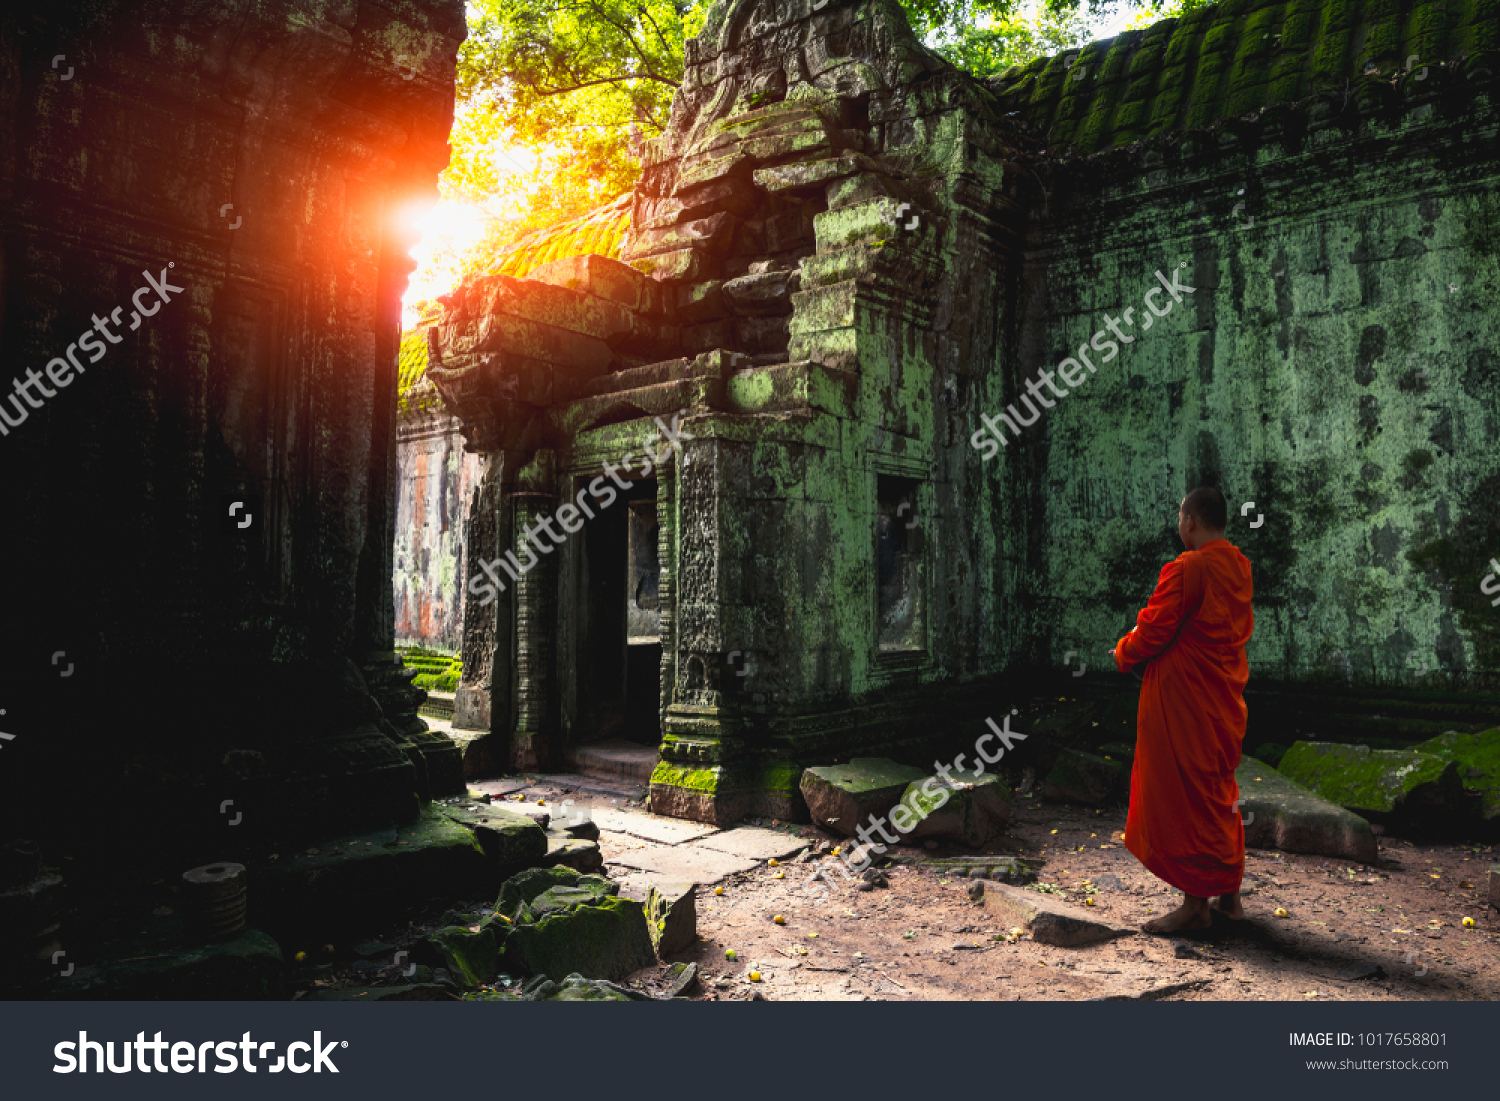 Buddhist monk at Angkor Wat ancient khmer architecture Ta Prohm temple ruins hidden in jungles, Cambodia #1017658801